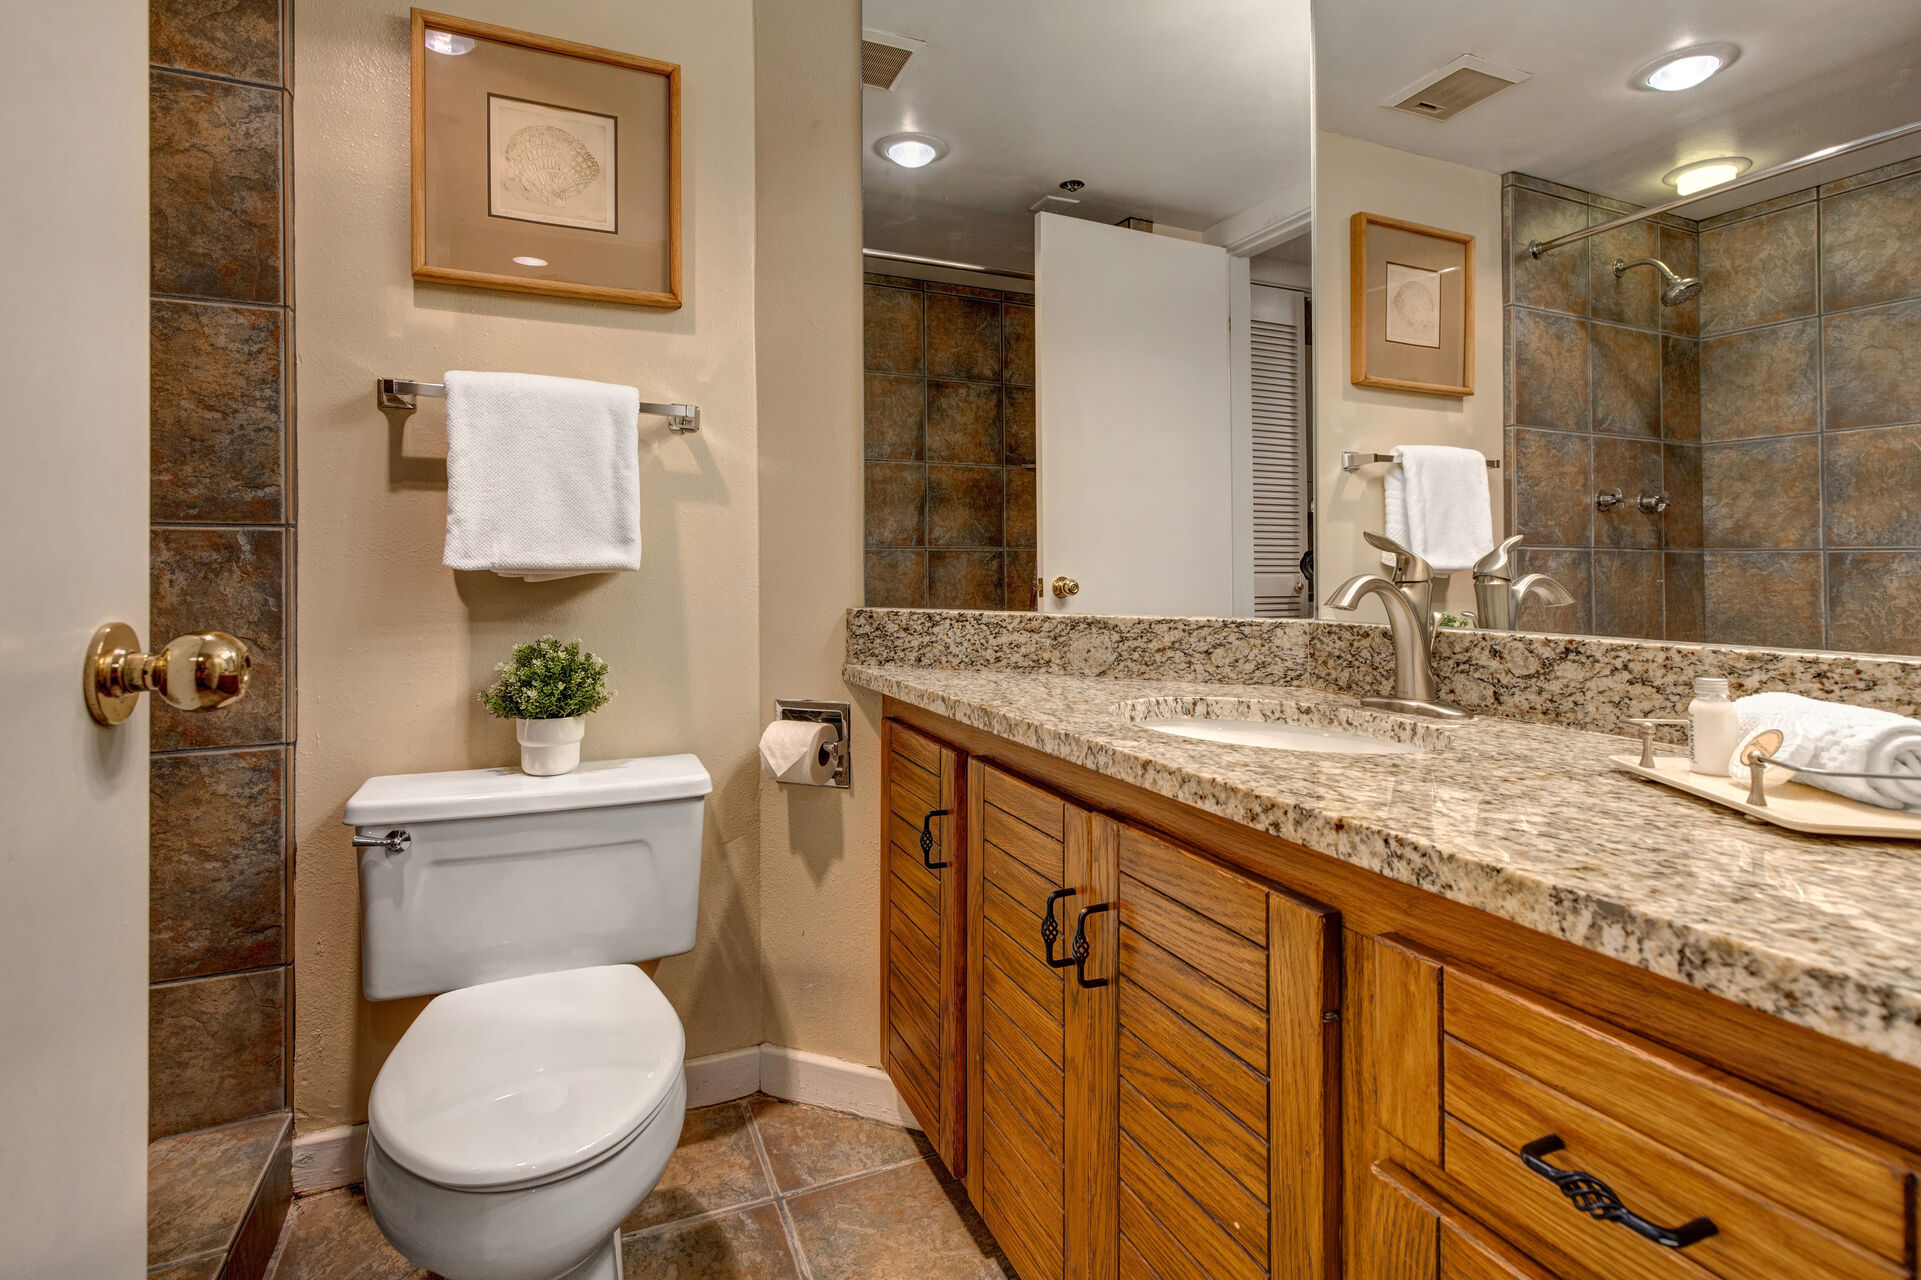 Shared Full Bathroom with tiled shower and private laundry closet access